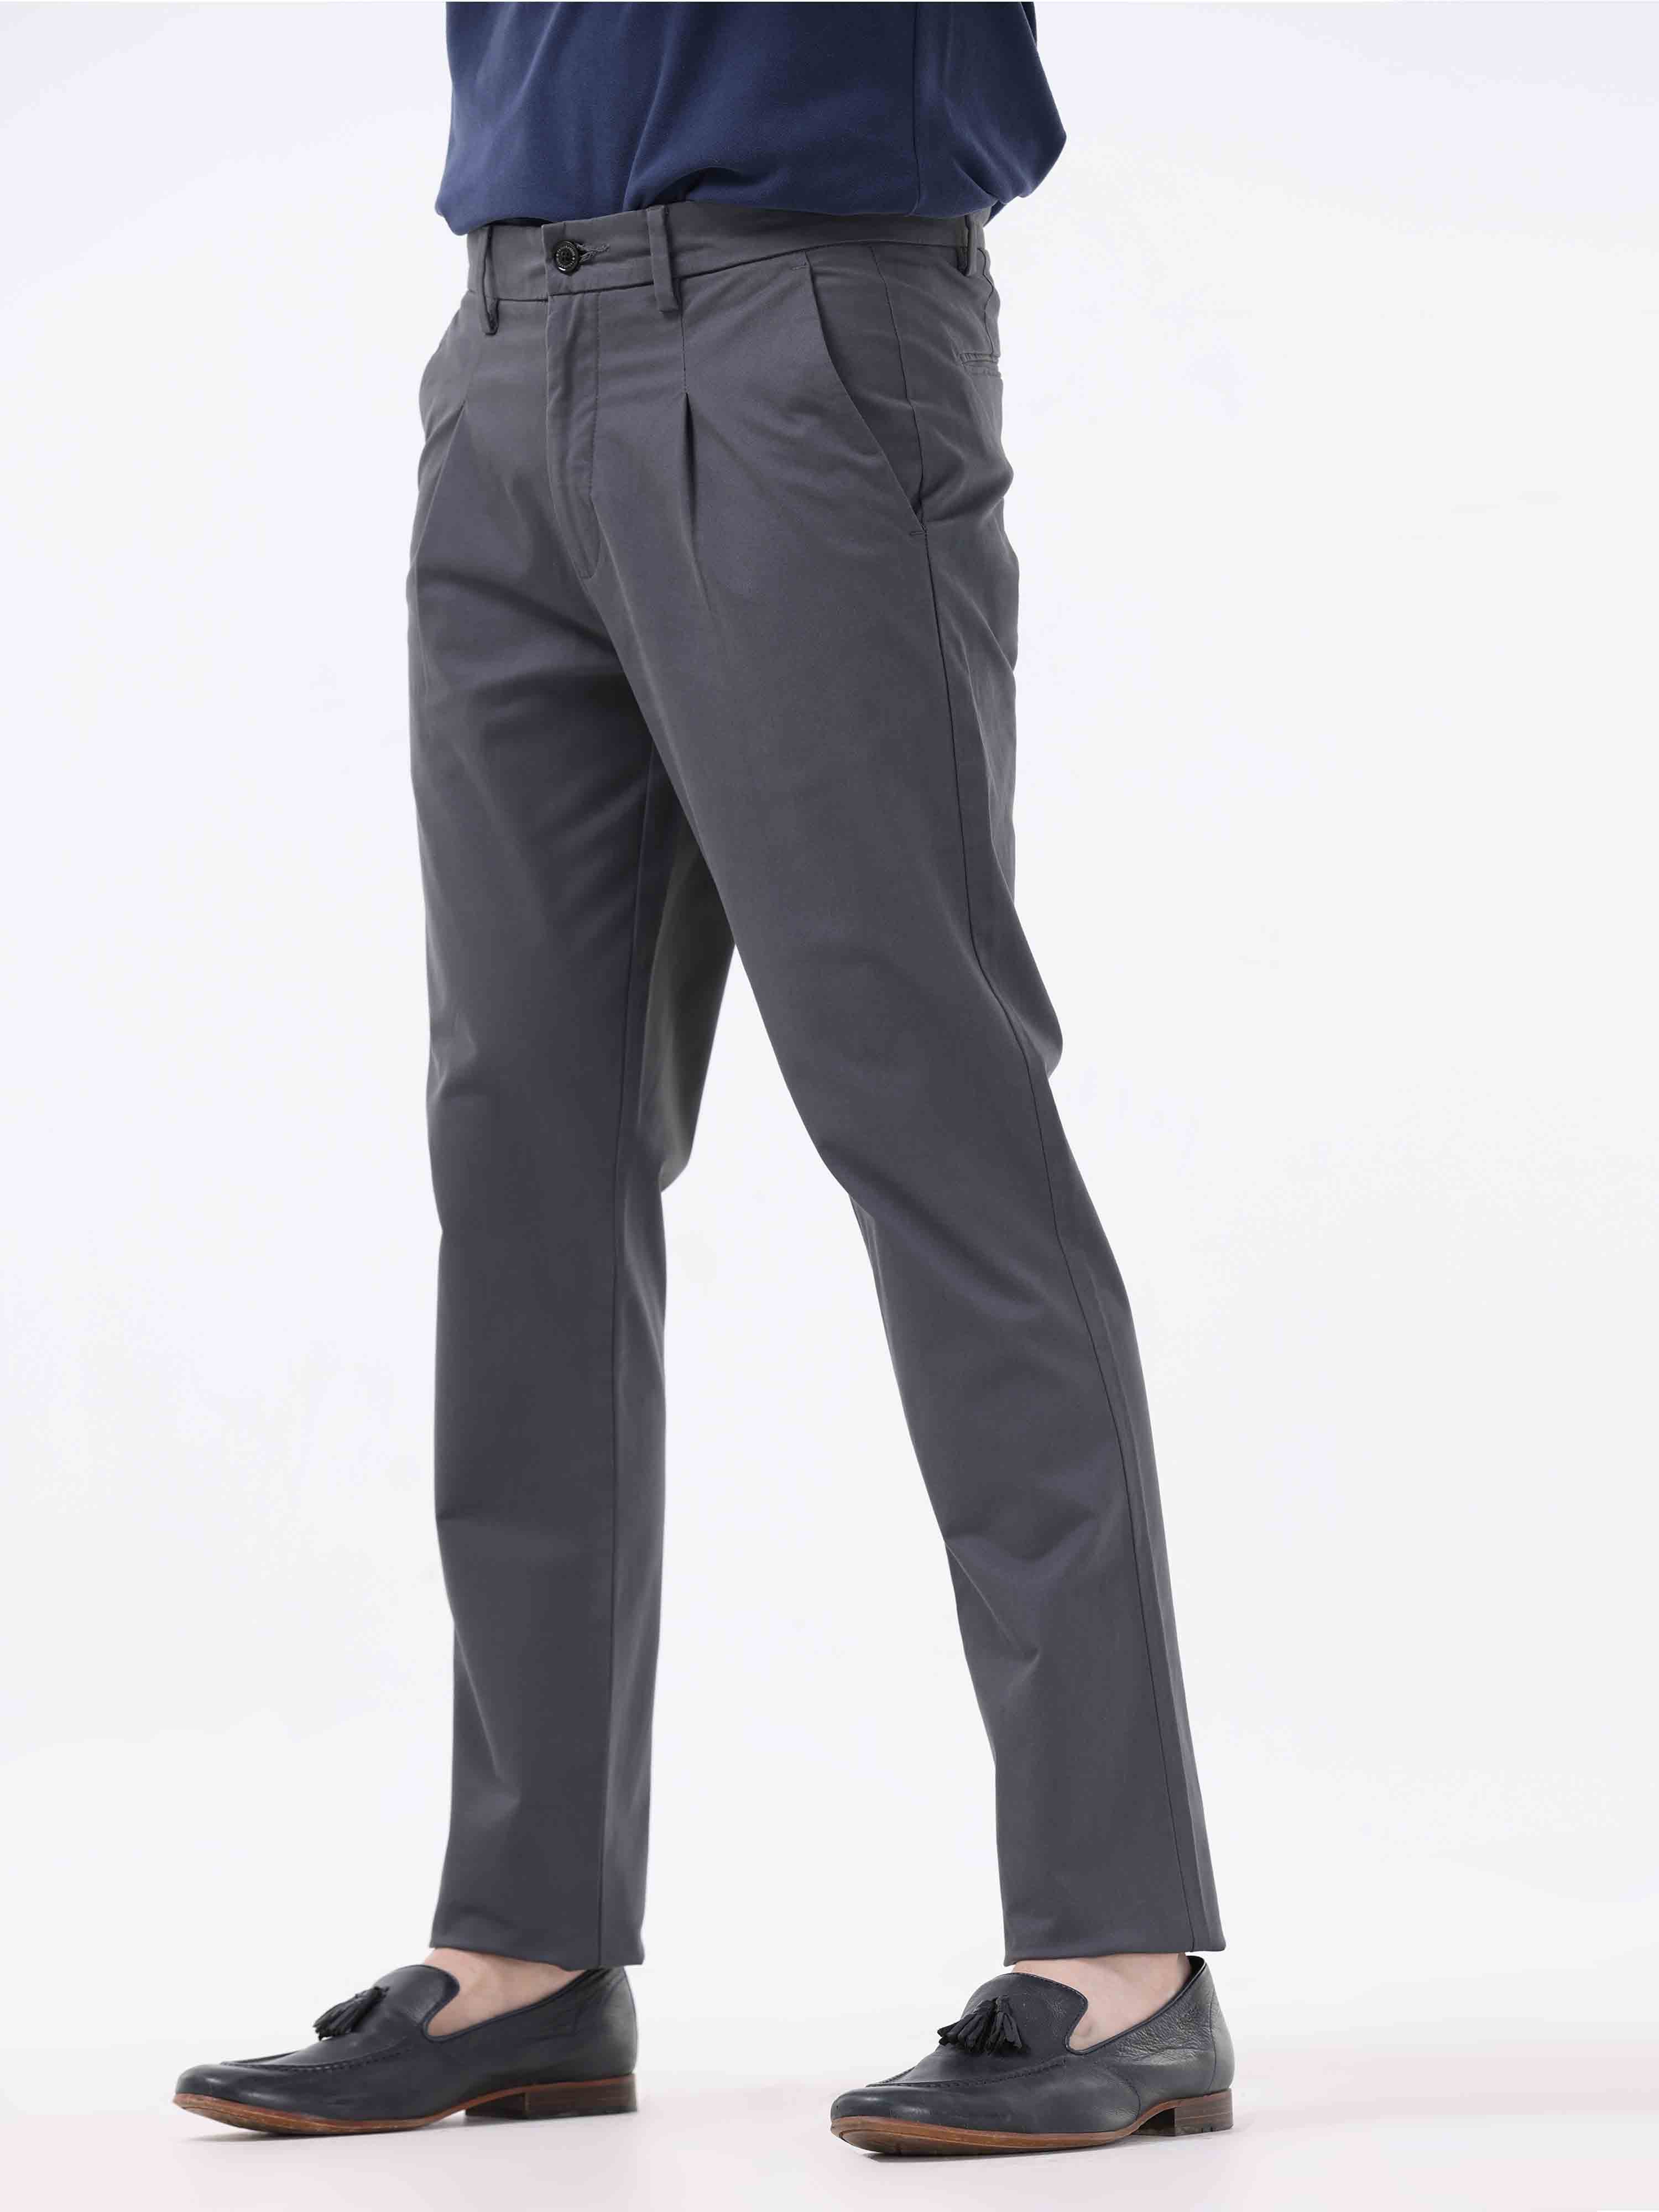 What to Wear With Grey Pants - The Trend Spotter | Short sleeve dress shirt  men, Black shirt outfits, Grey pants outfit